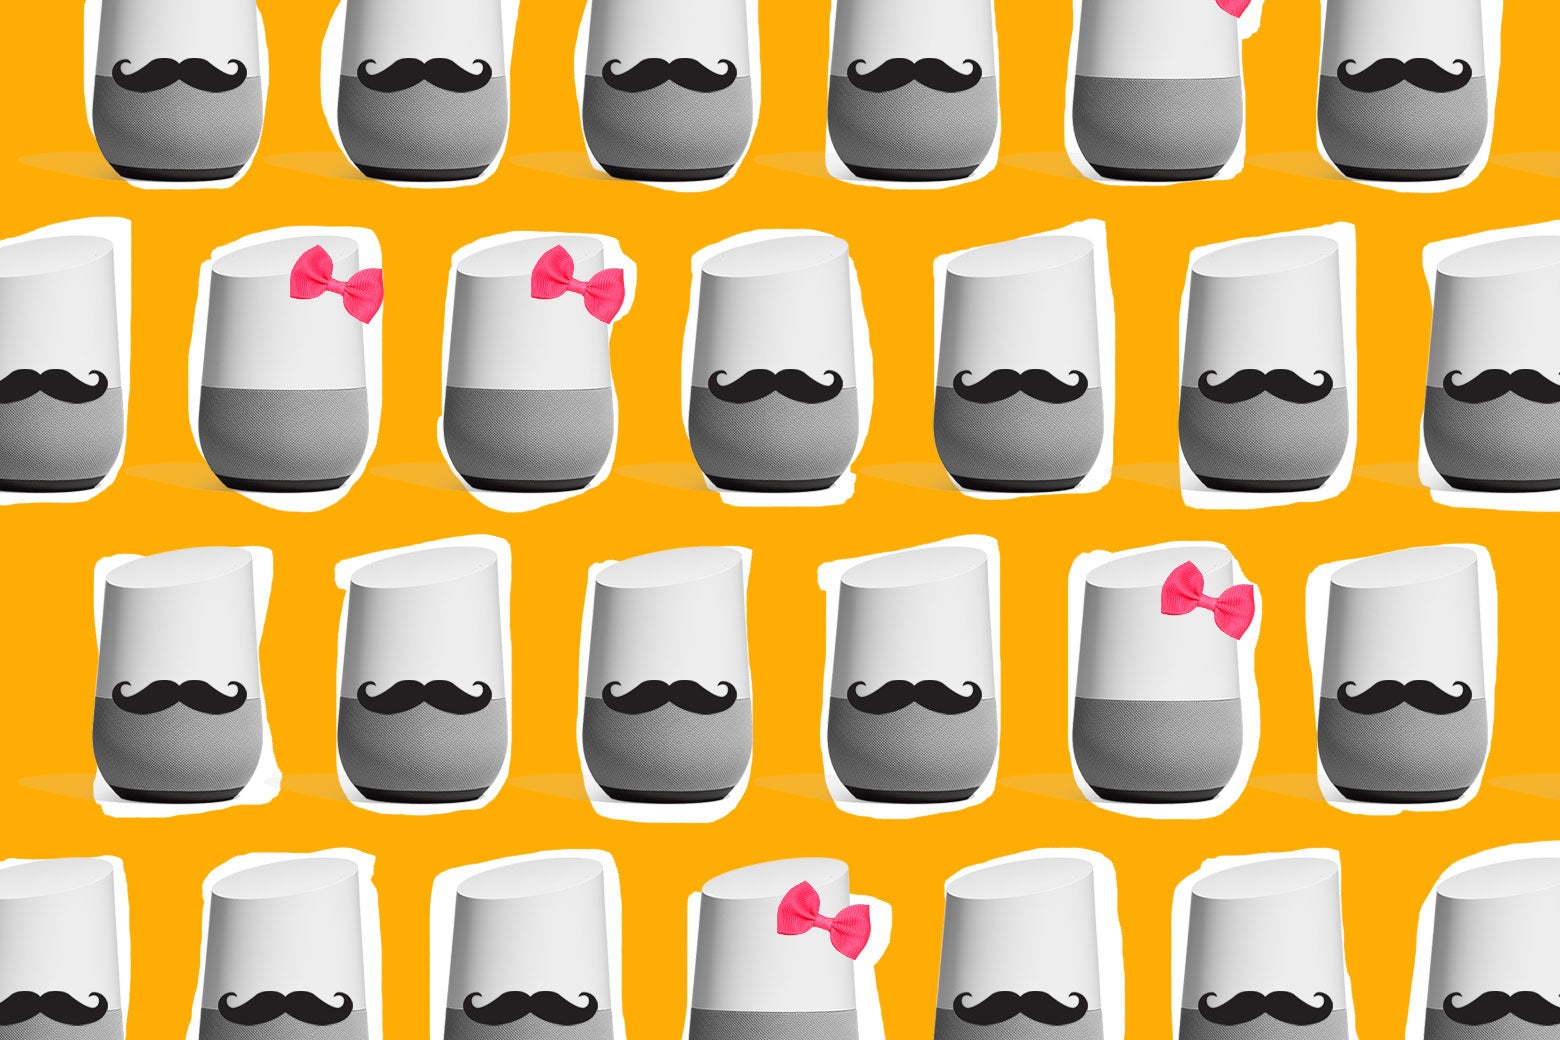 Photo illustration: Google Home devices with alternating mustaches and pink bows.